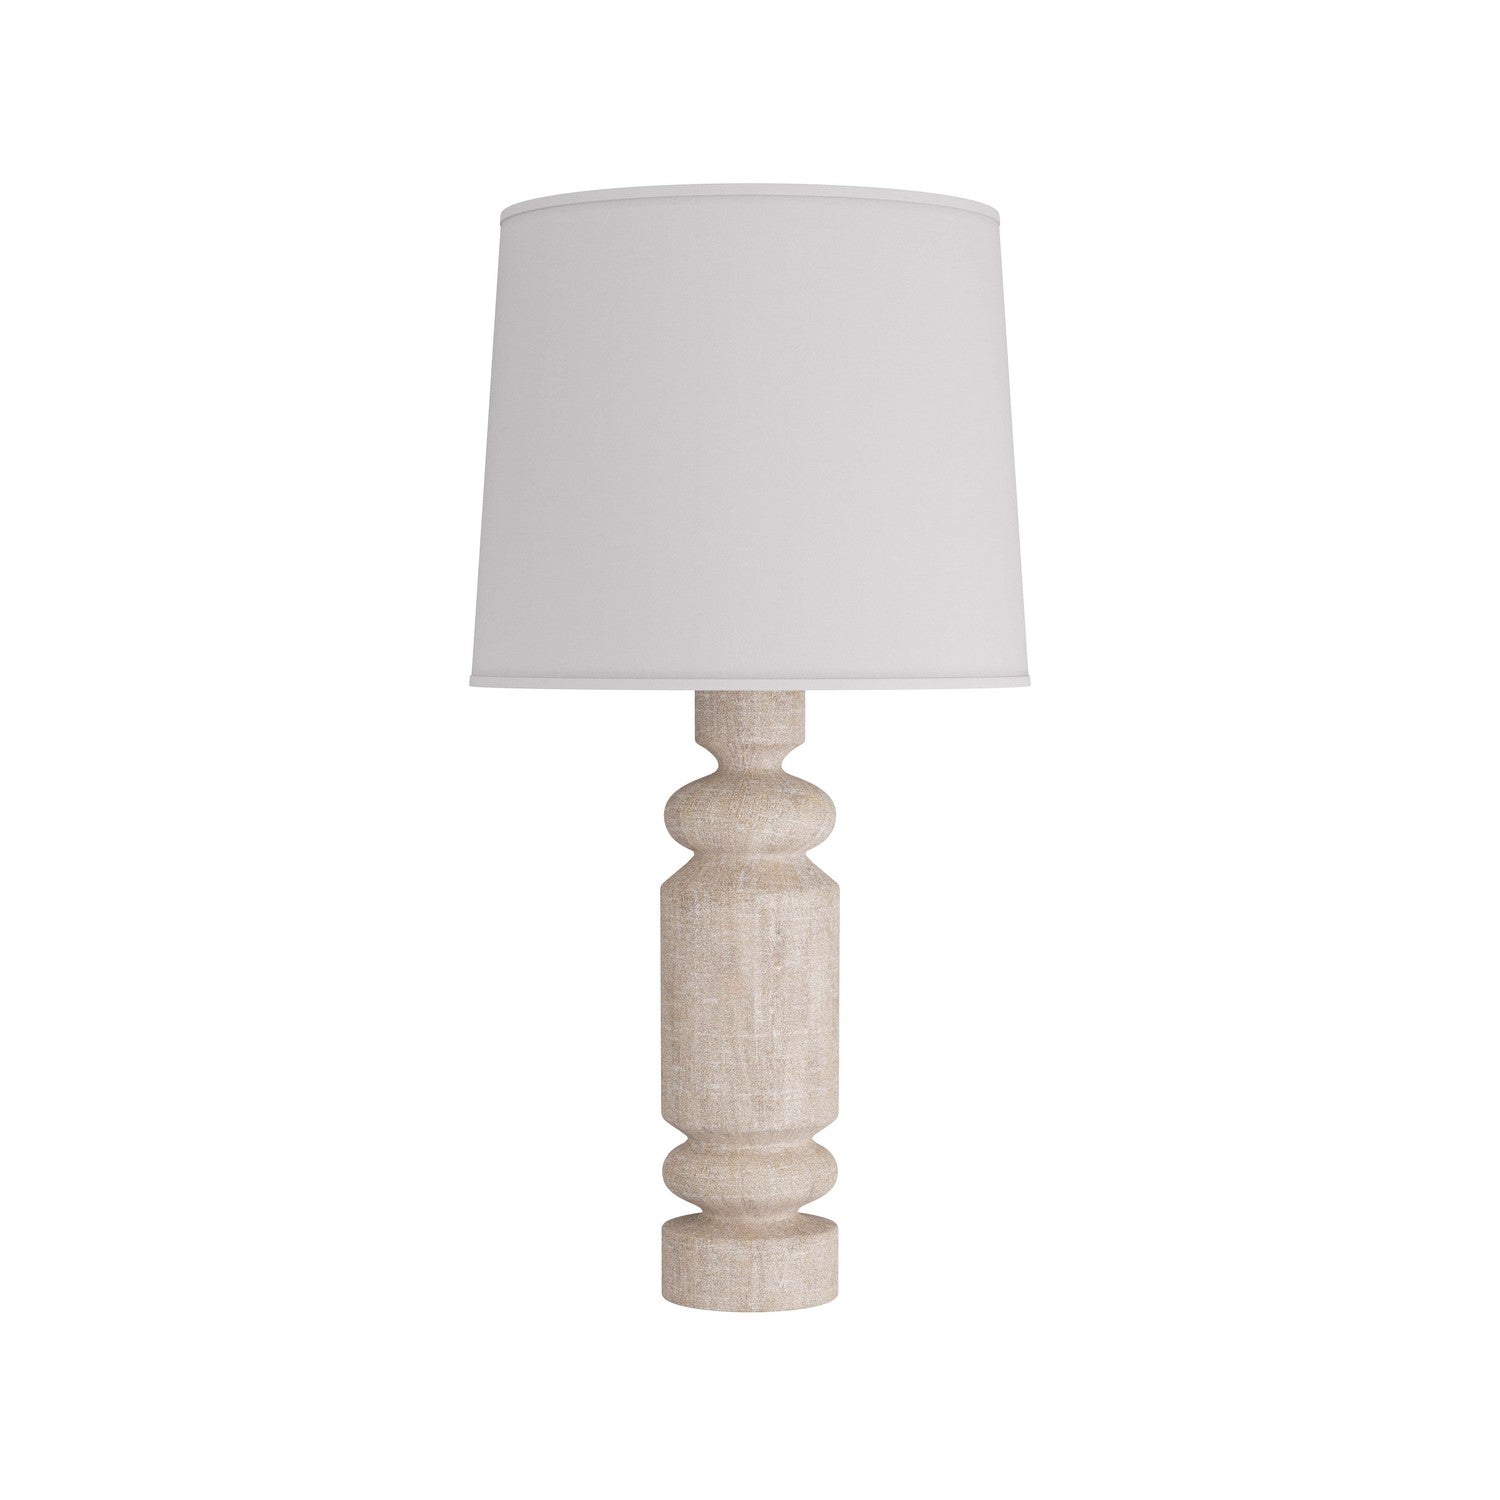 One Light Table Lamp from the Woodrow collection in Limewash finish